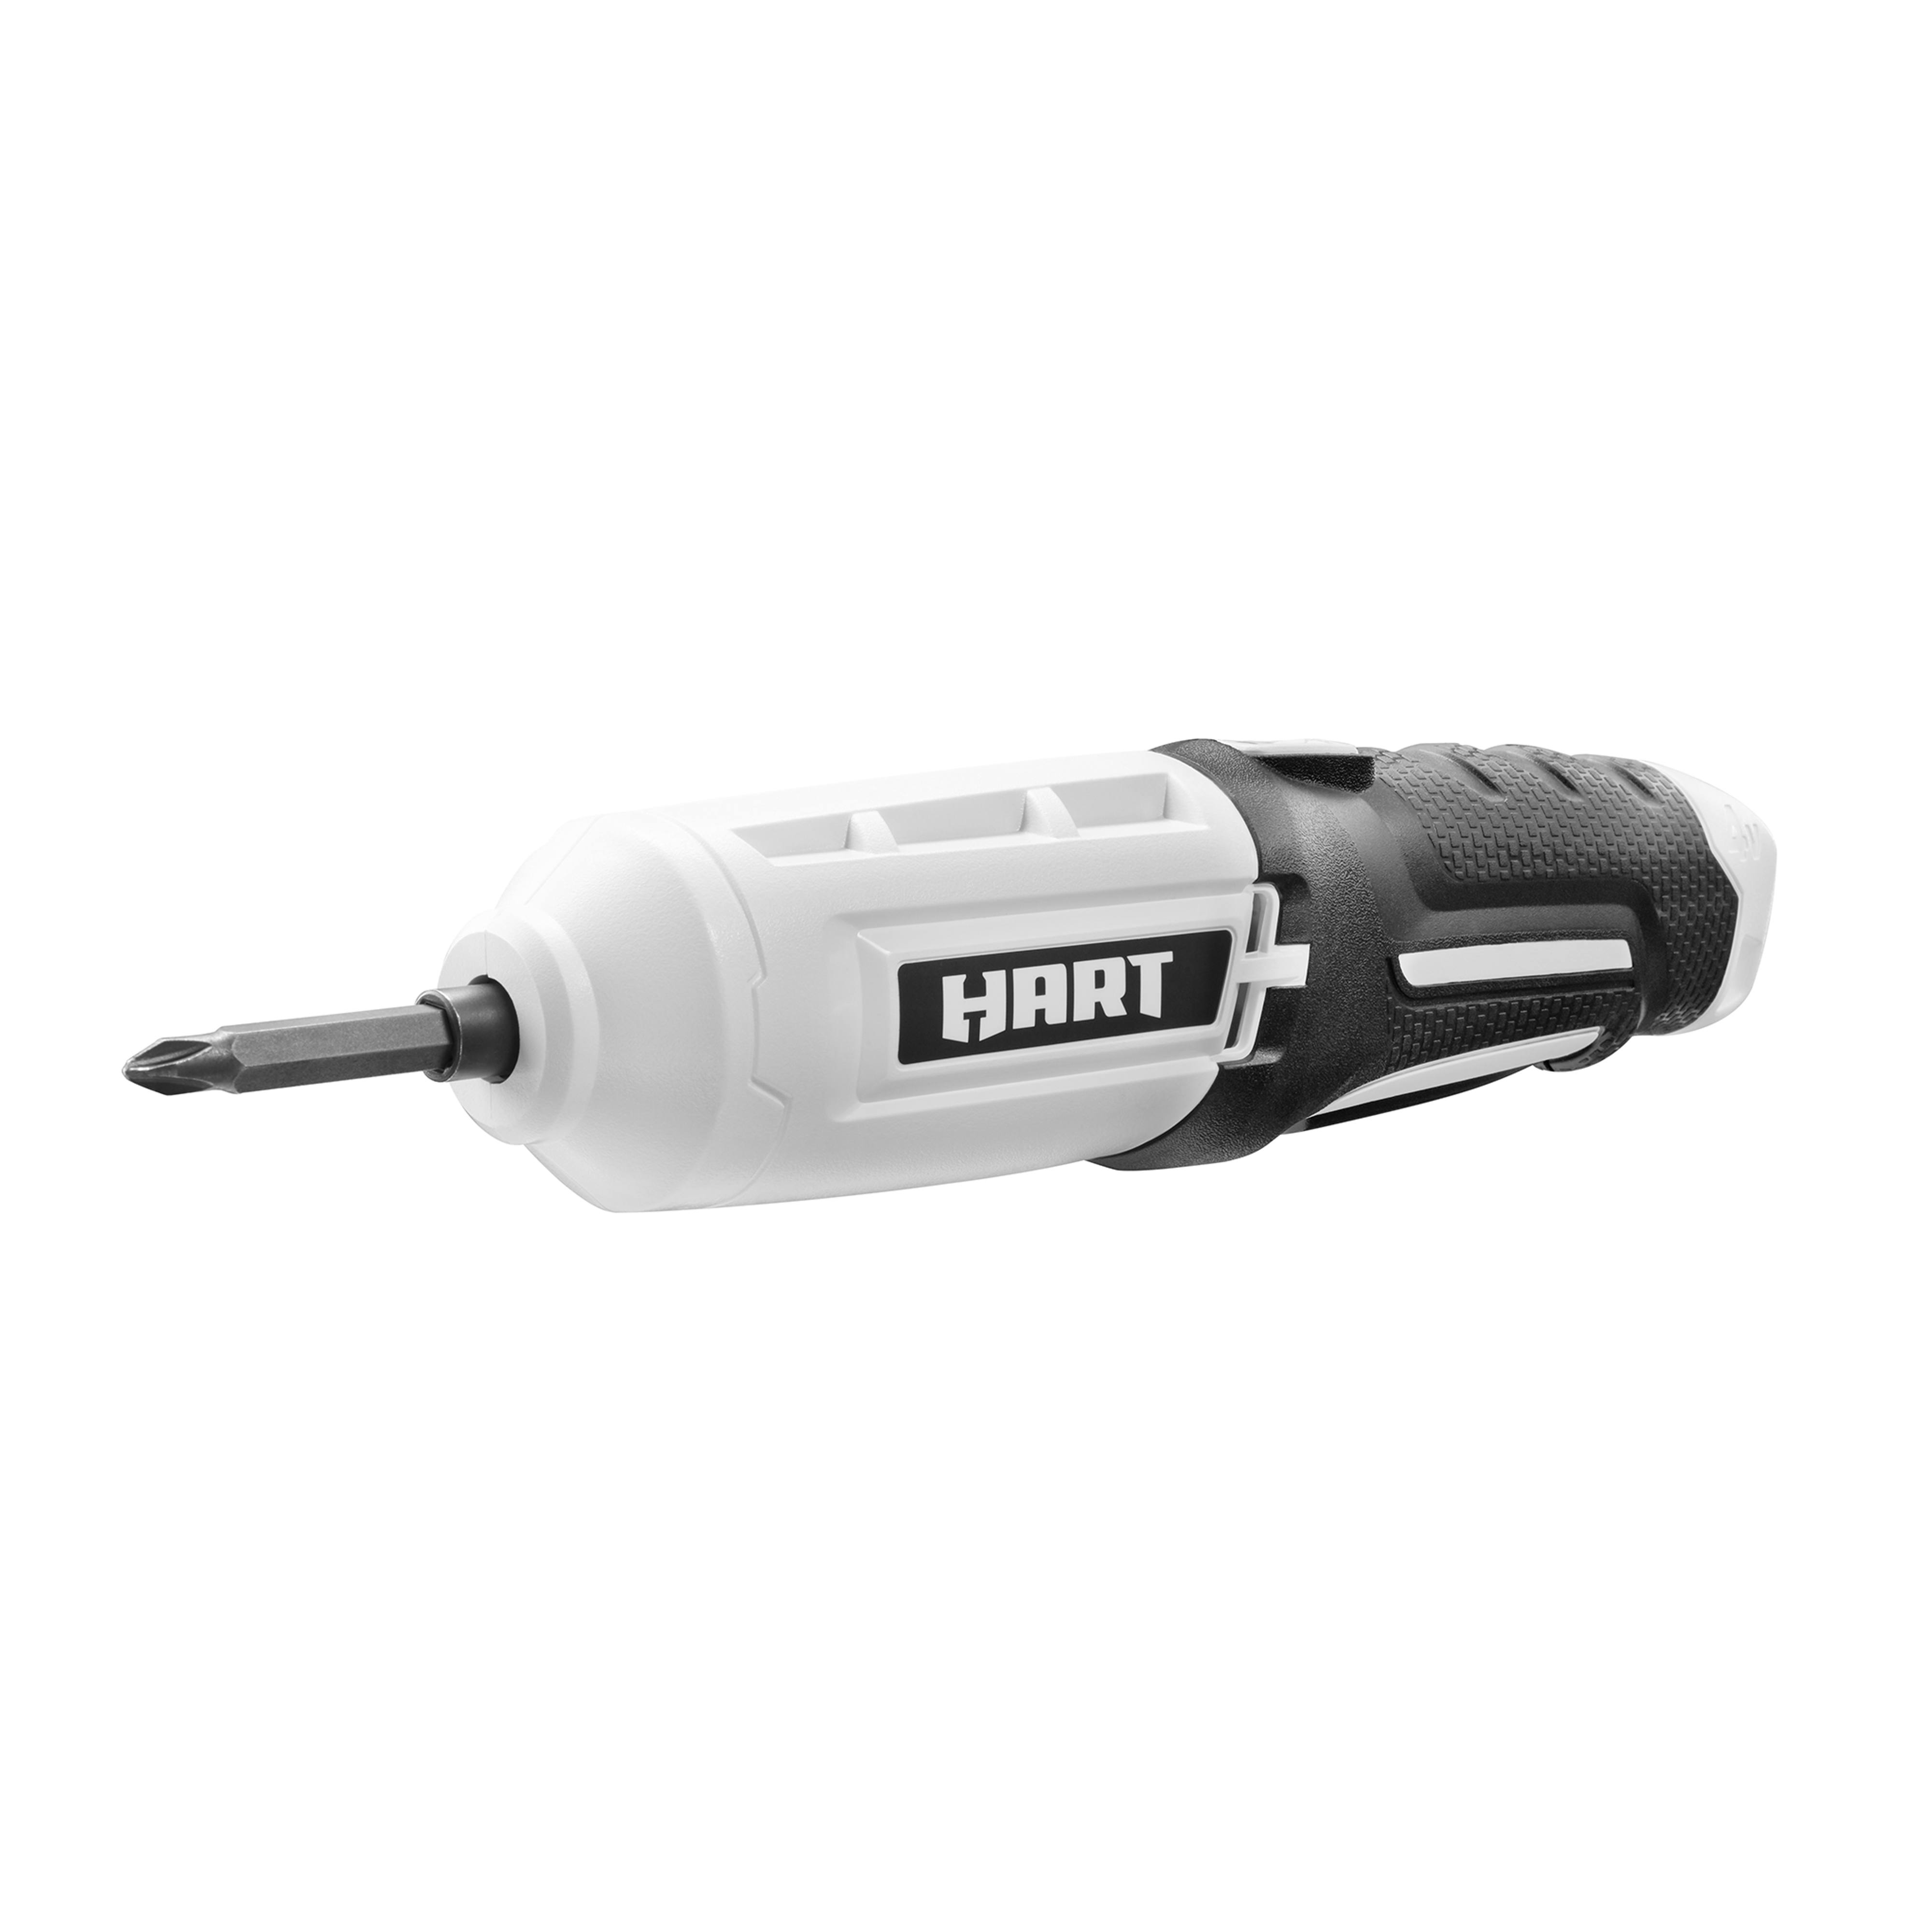 HART 4-Volt Rechargeable Screwdriver with Philips and Slotted Bit - image 1 of 6